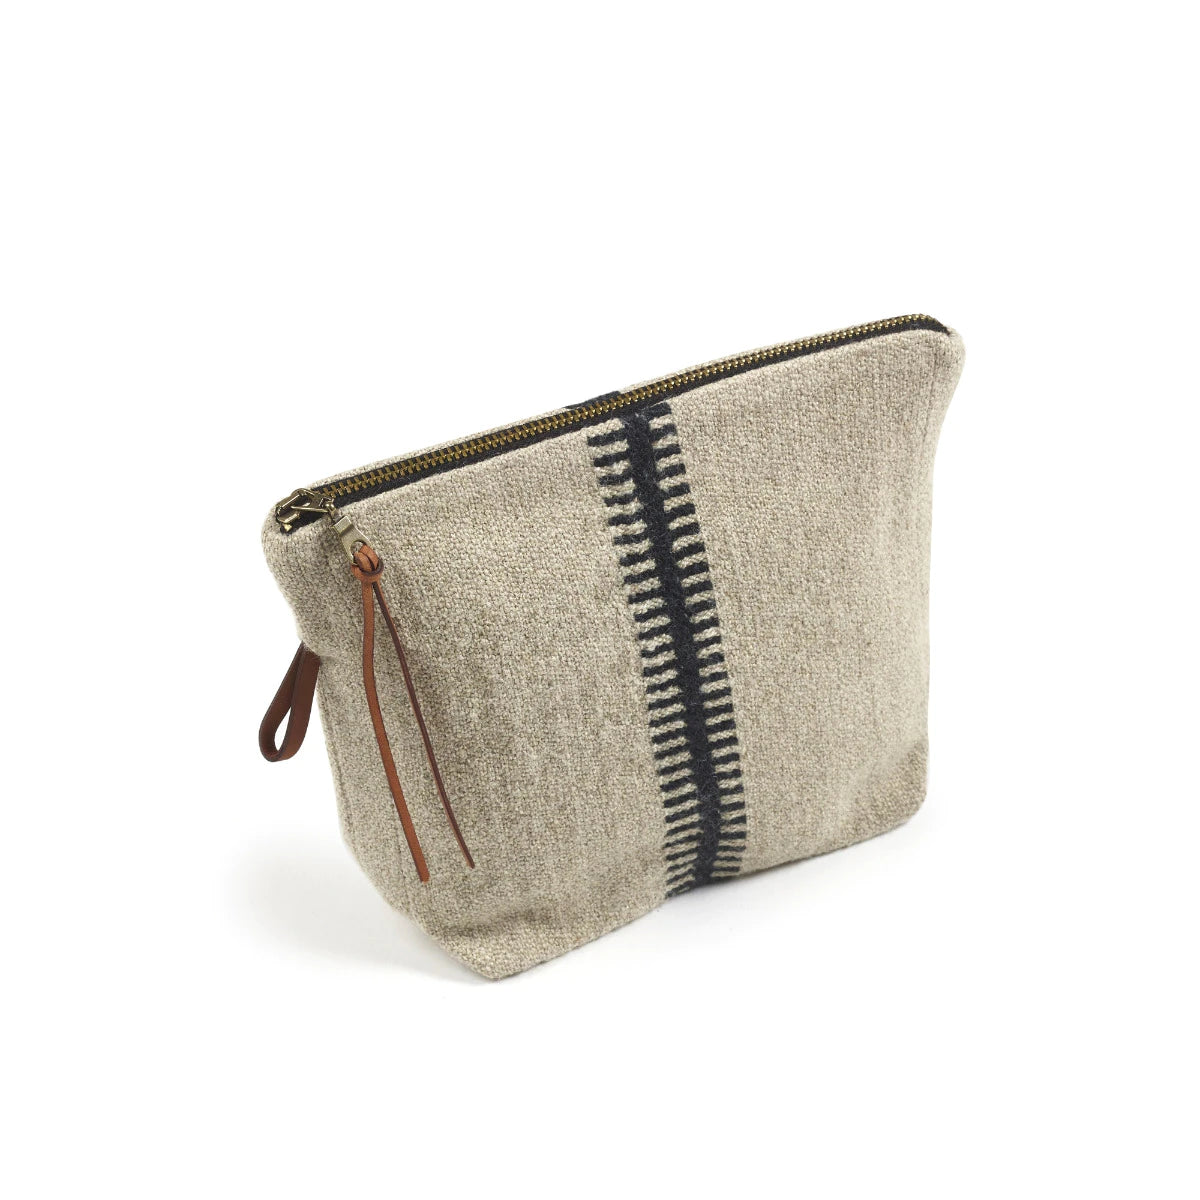 marshall pouch by Libeco at adorn.house